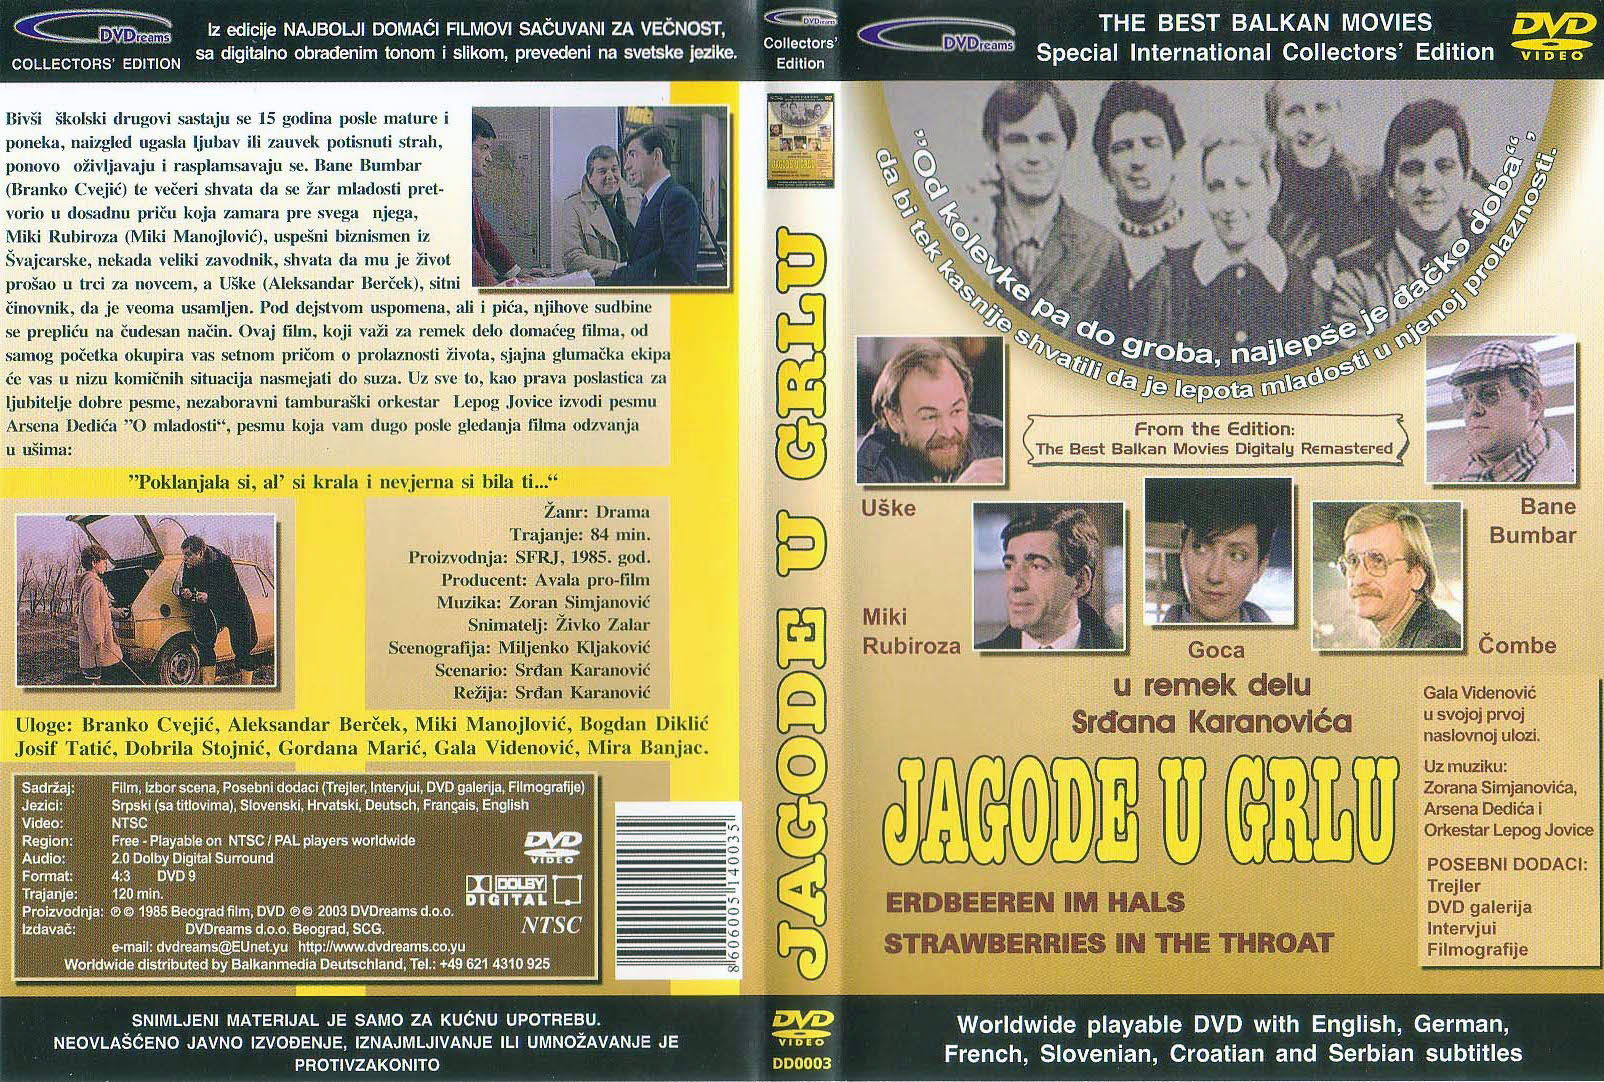 Click to view full size image -  DVD Cover - J - Jagode_u_Grlu_-_prednja_zadnja - Jagode_u_Grlu_-_prednja_zadnja.jpg